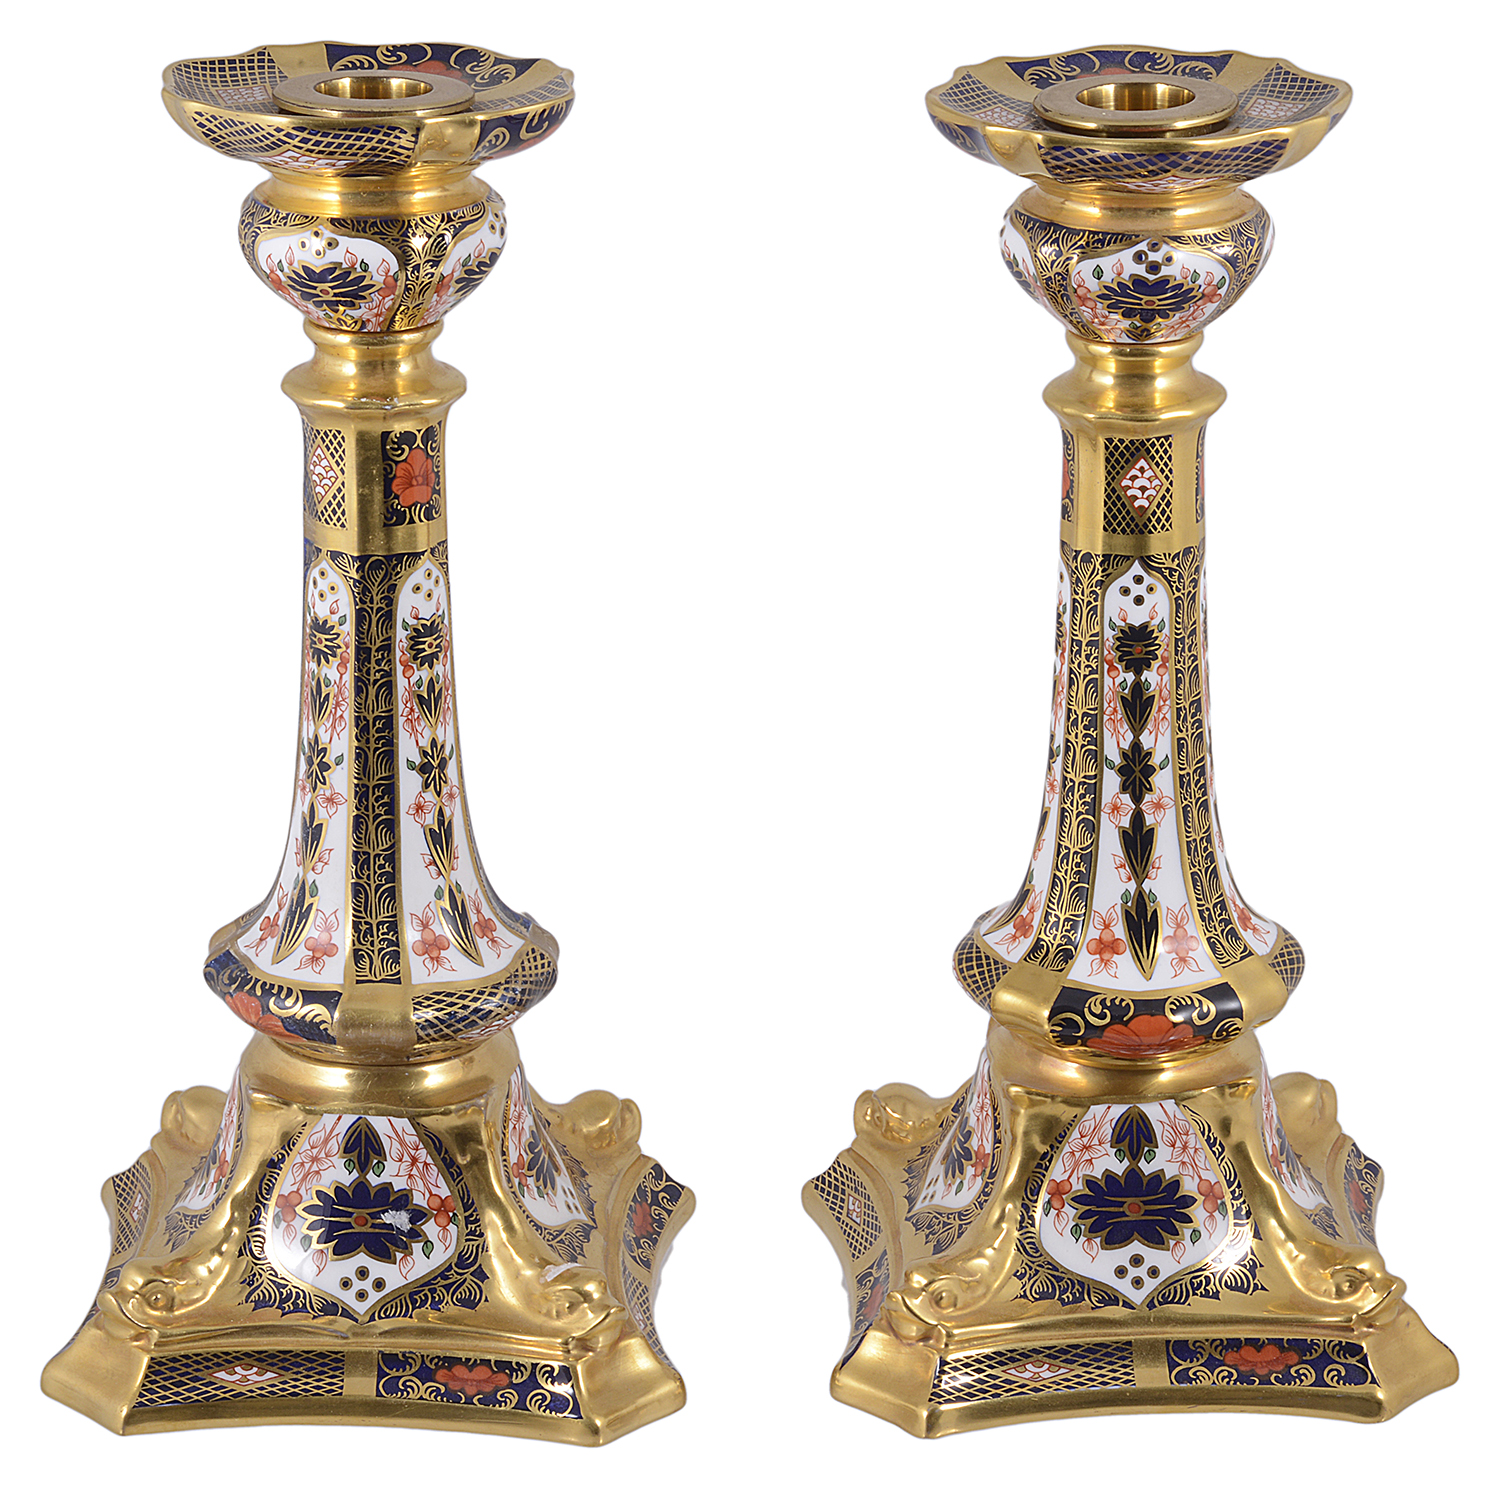 A pair of Royal Crown Derby 'Imari' pattern candlesticks, early 20th century